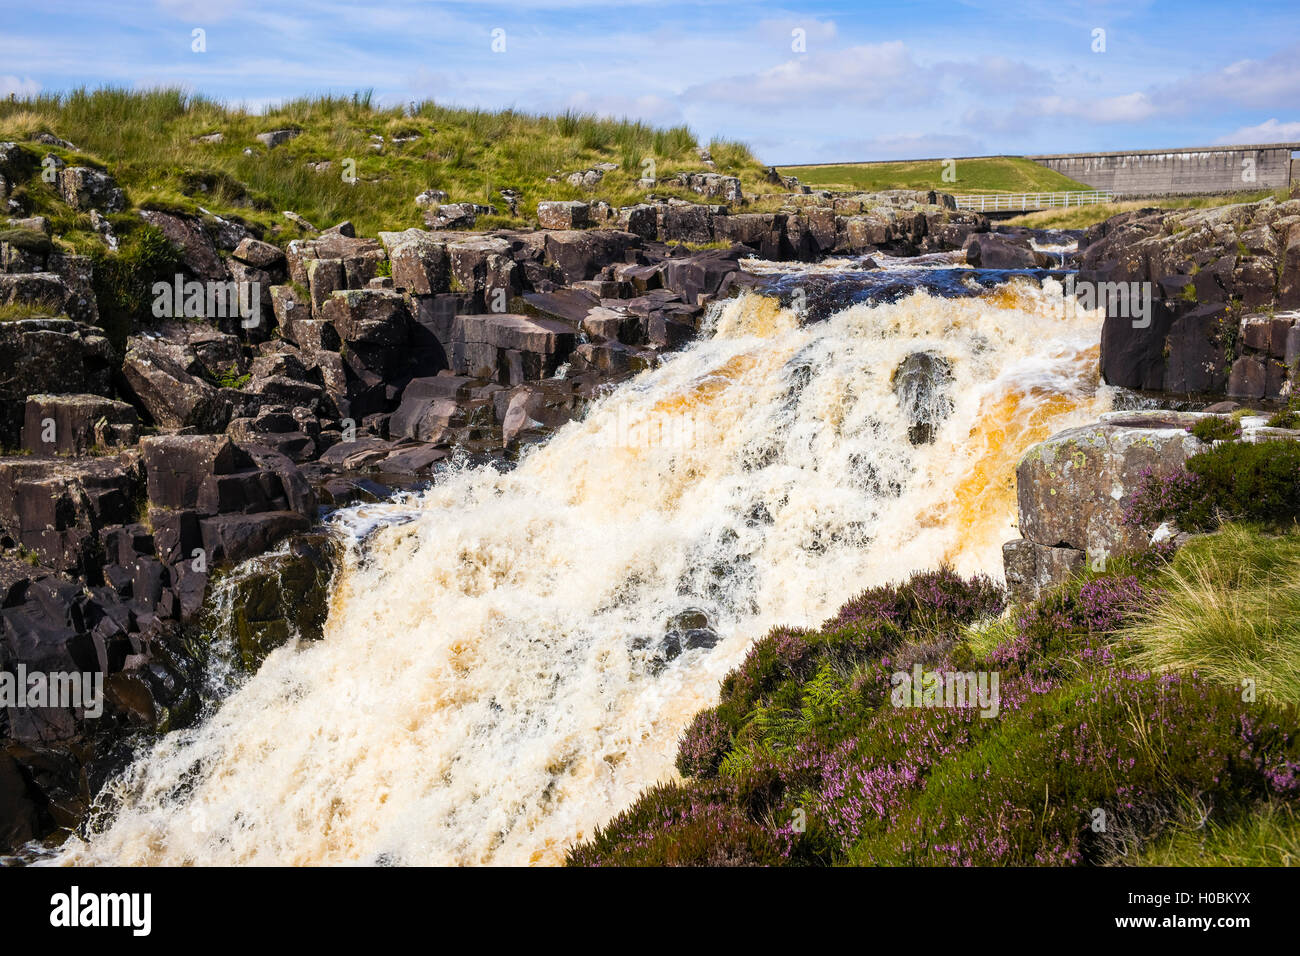 The Upper Reaches of Cauldron Snout waterfall, Upper Teesdale National Nature Reserve, Durham, England, UK Stock Photo